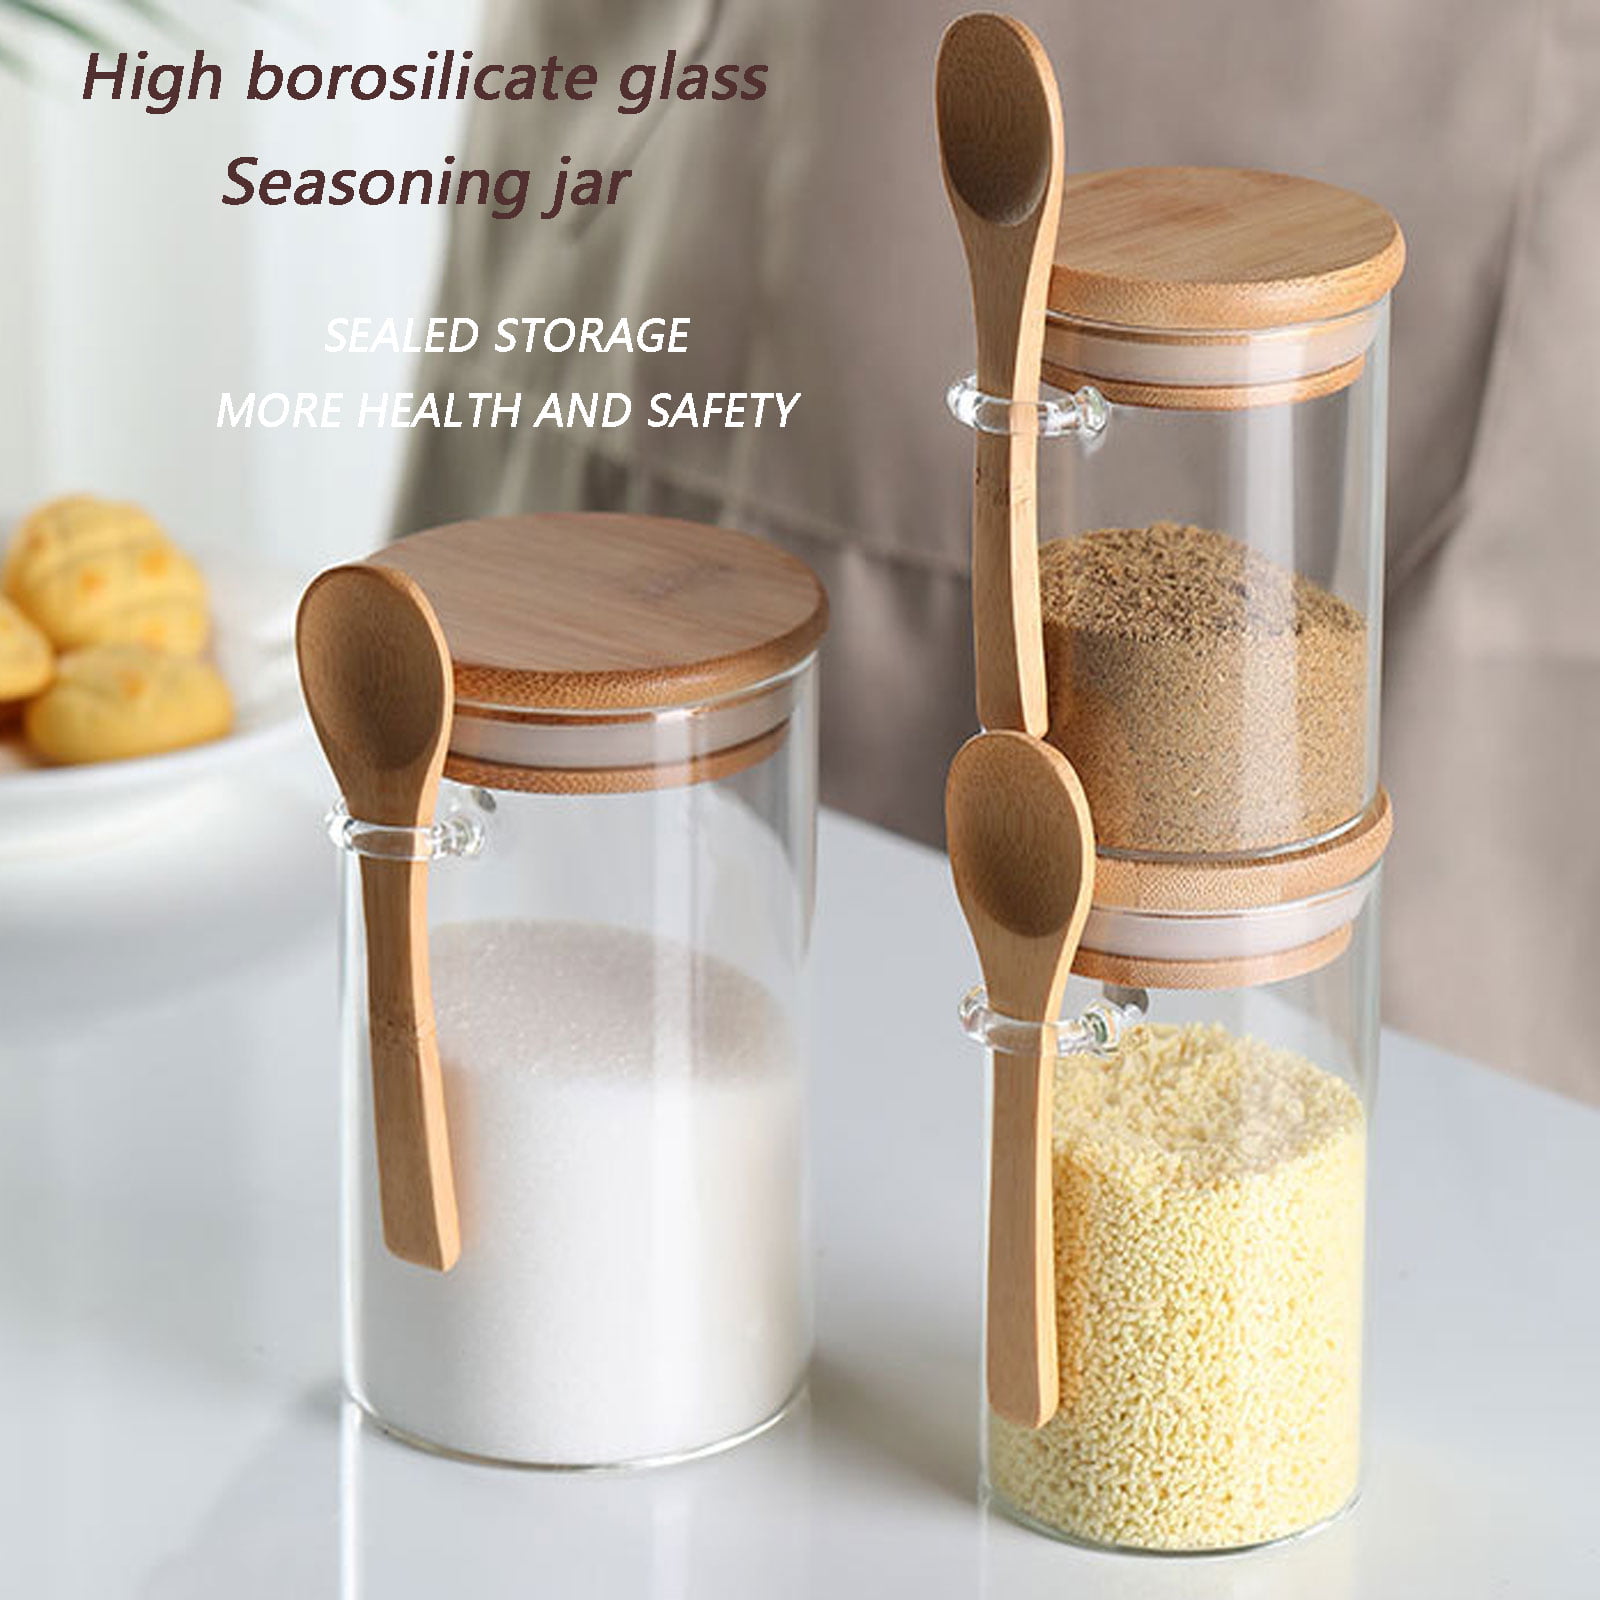 2x 450ml Clear Food Sealed Storage with Bamboo Lids & Spoons Glass